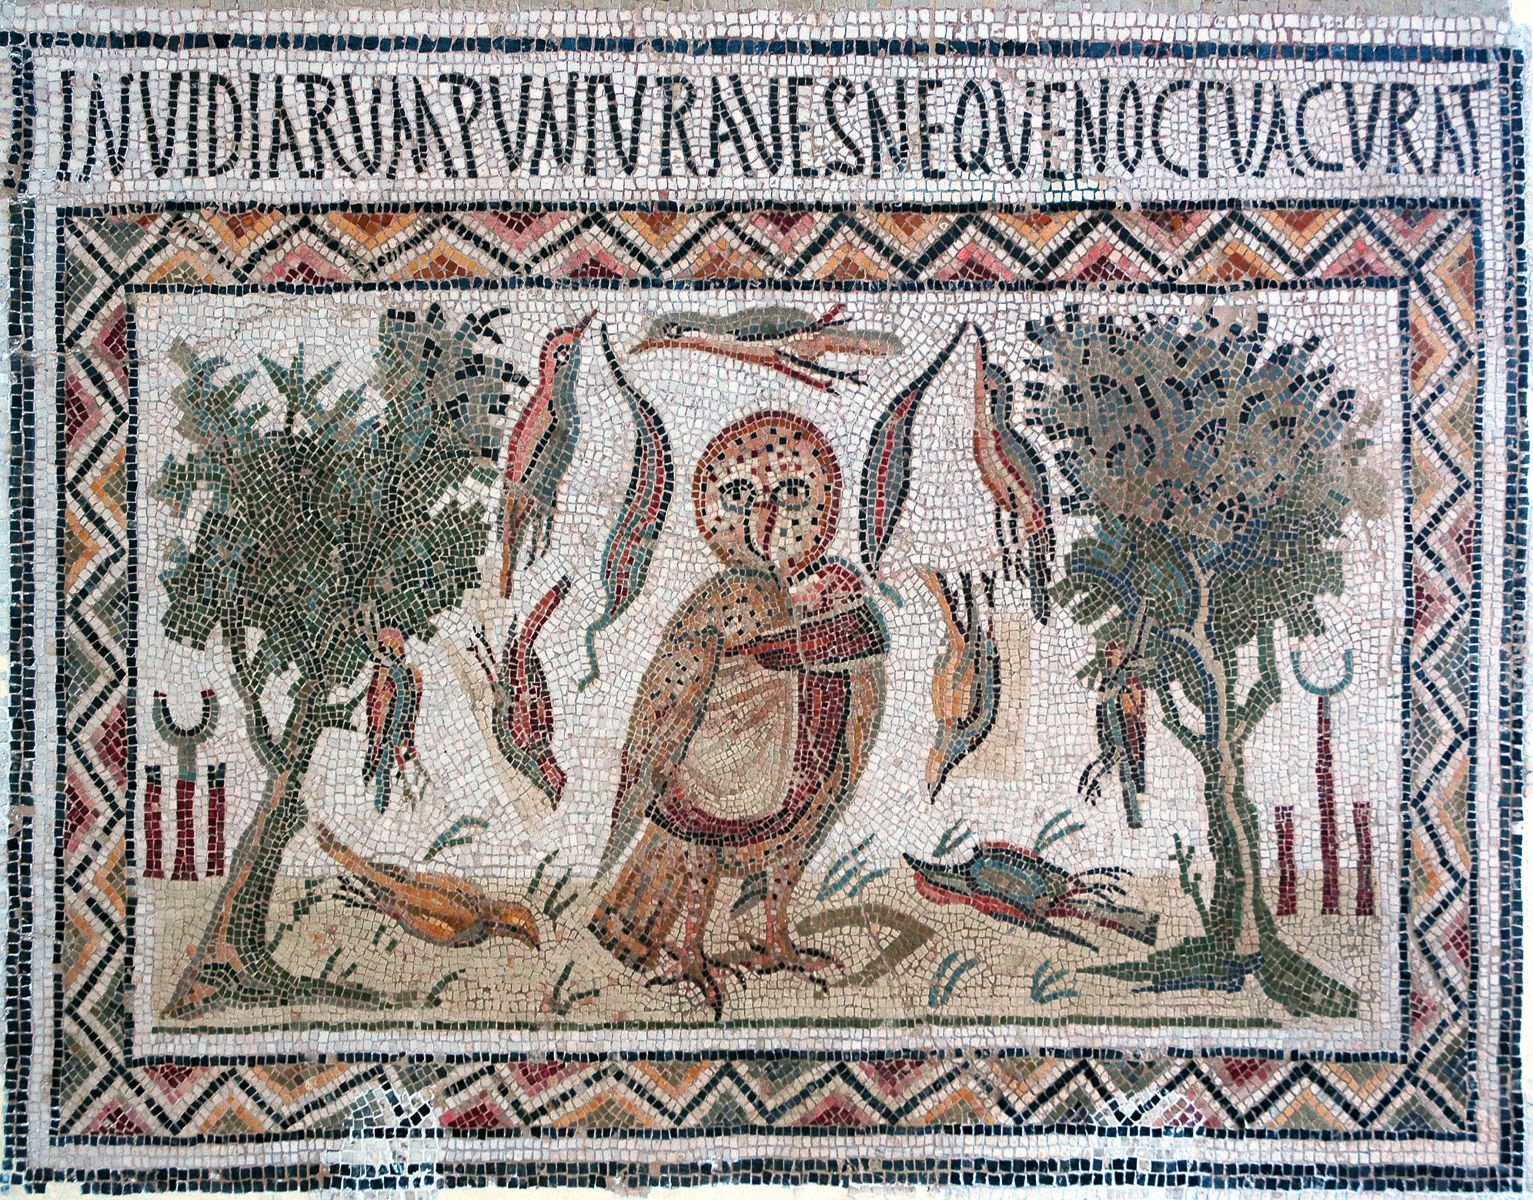 Roman Mosaic—an ancient equivalent of a billboard advertising the Telegenii